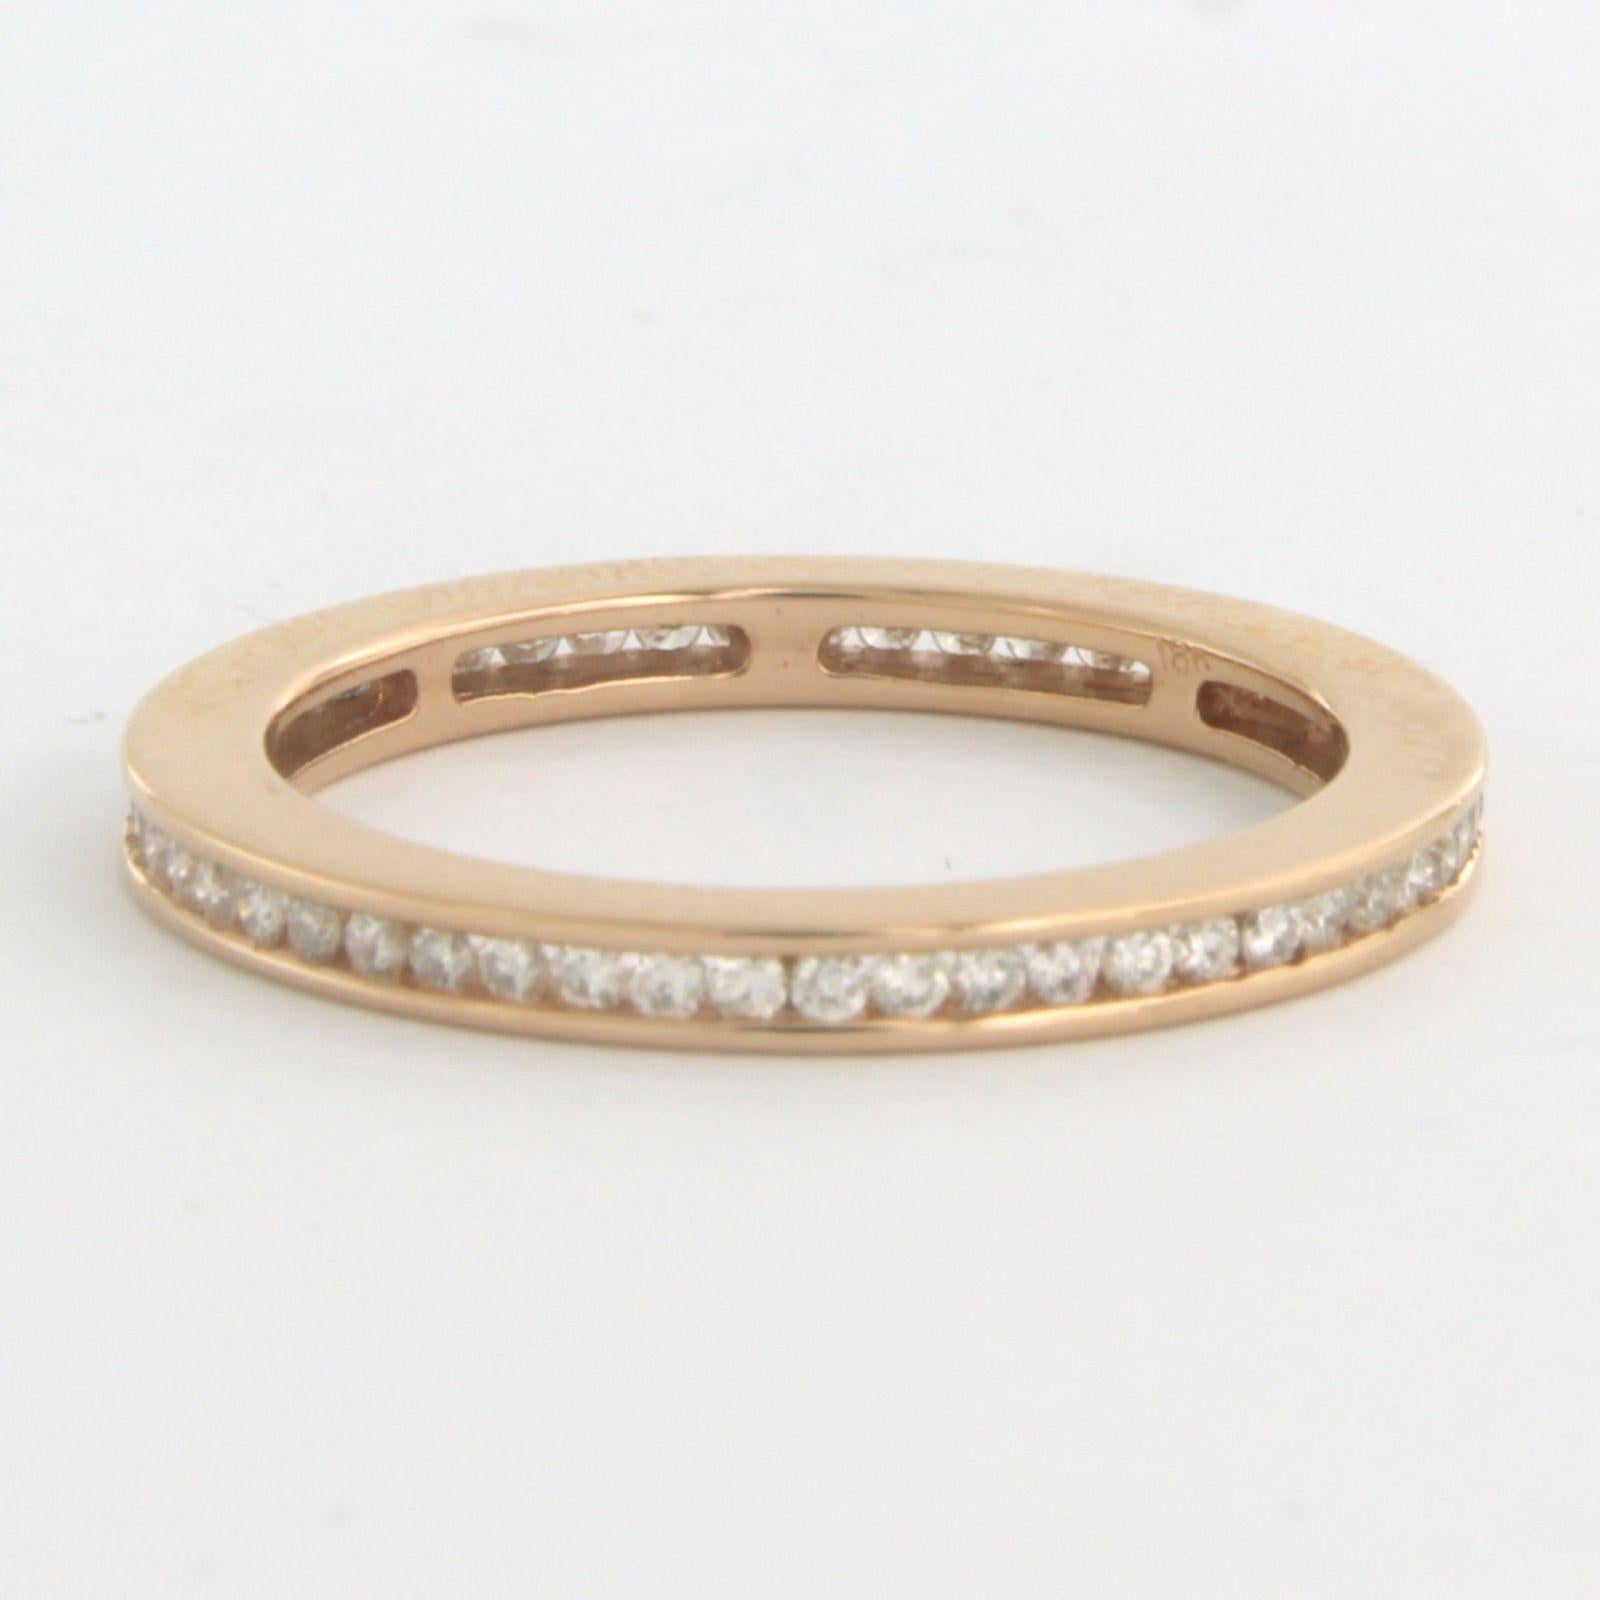 Women's Eternity Ring with diamonds up to 0.60ct. 18k pink gold For Sale